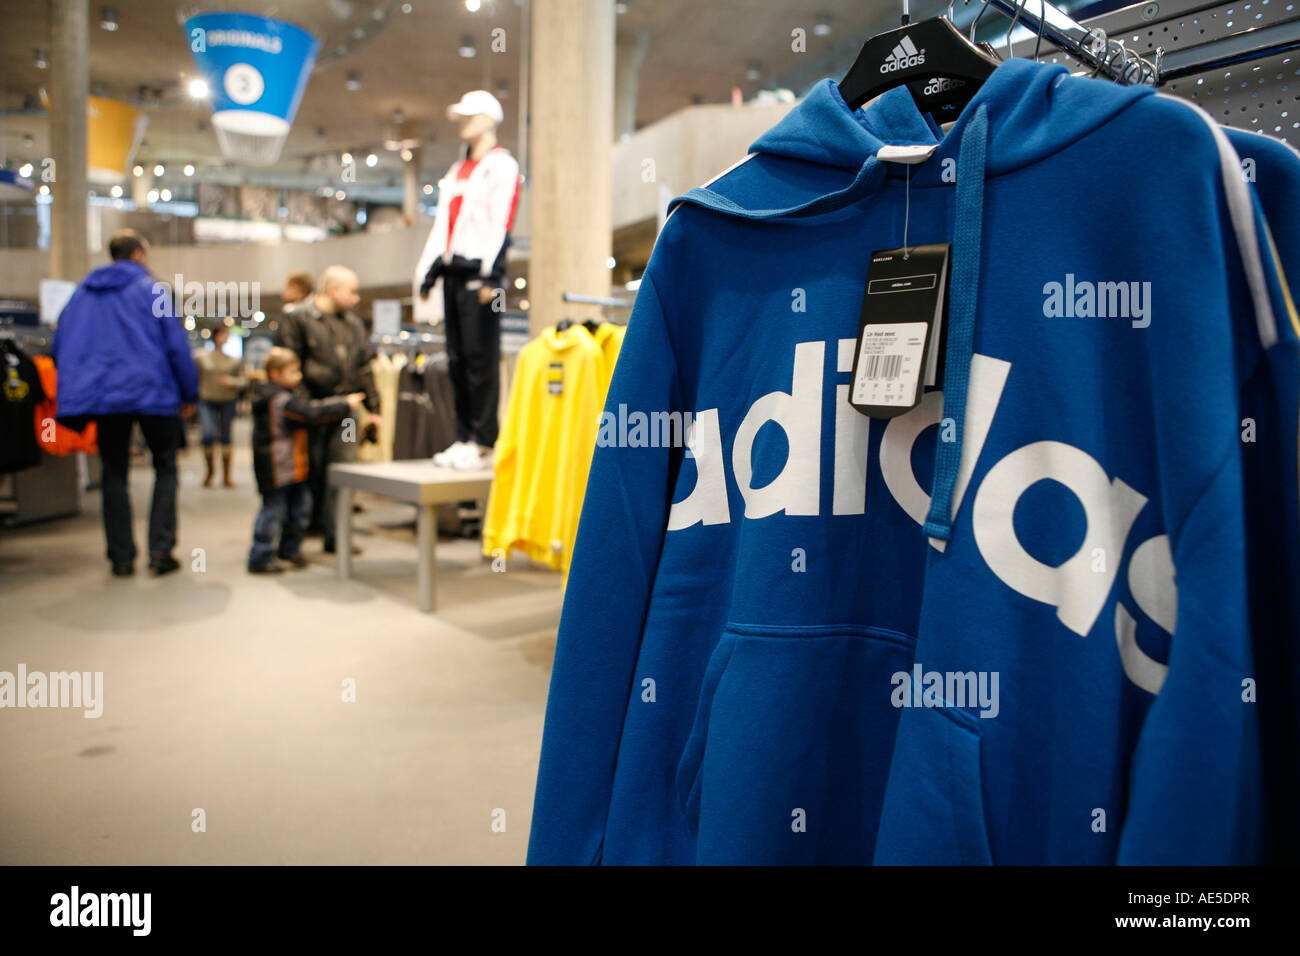 Adidas Factory Outlet Center High Resolution Stock Photography and Images -  Alamy